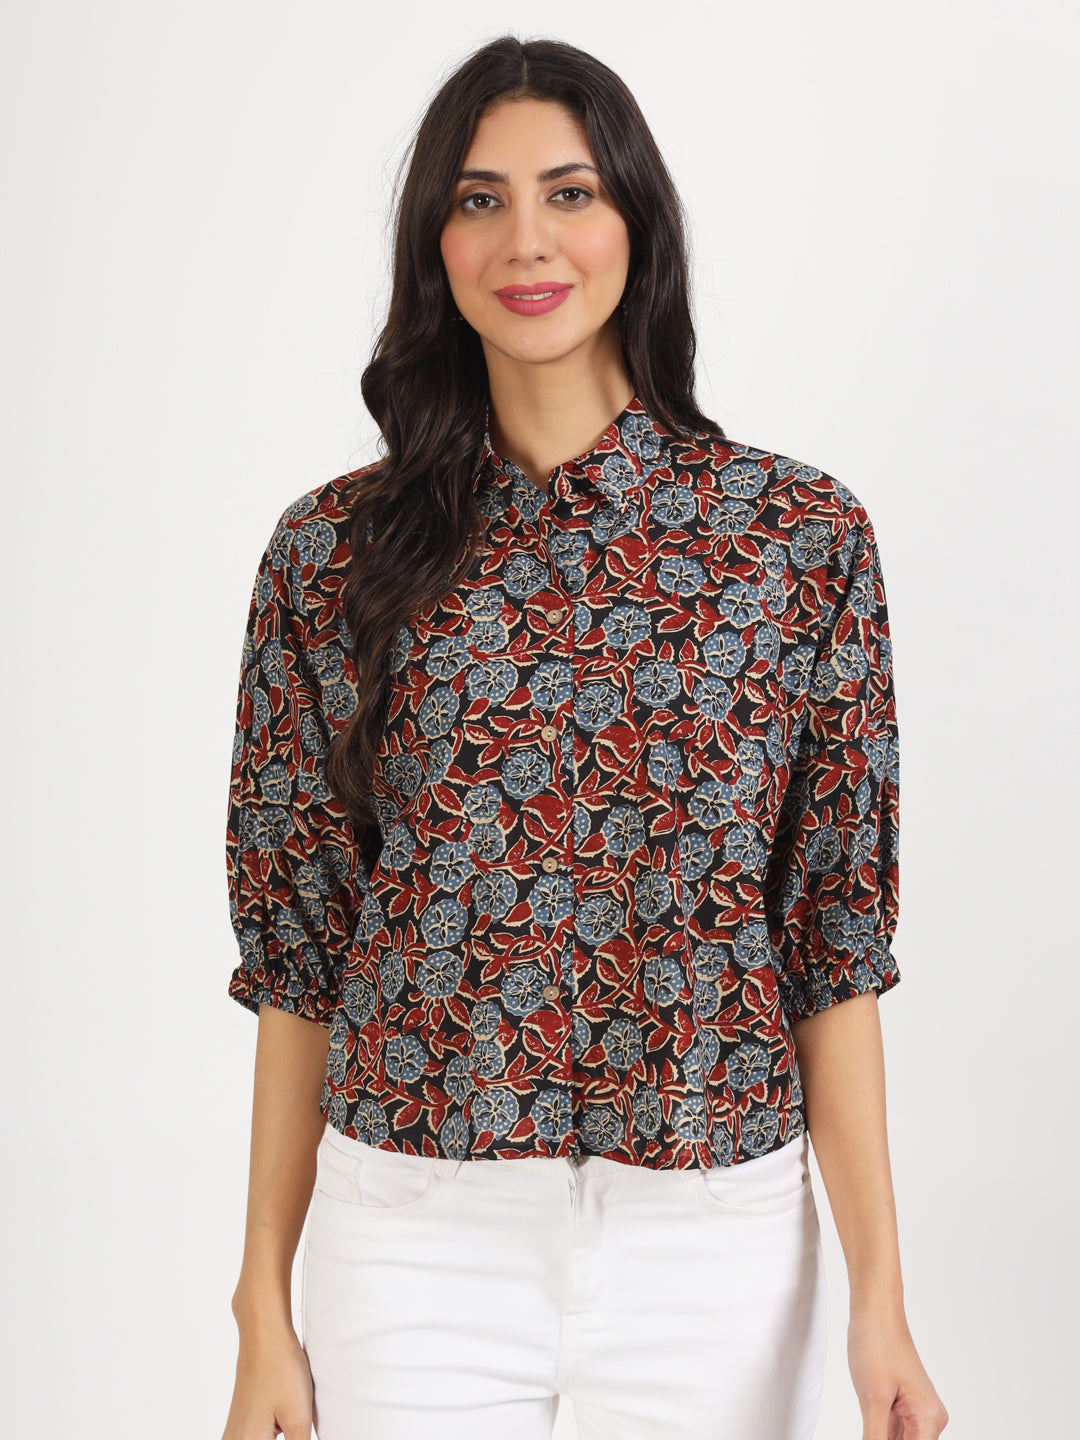 Black Floral Printed Cotton Tops